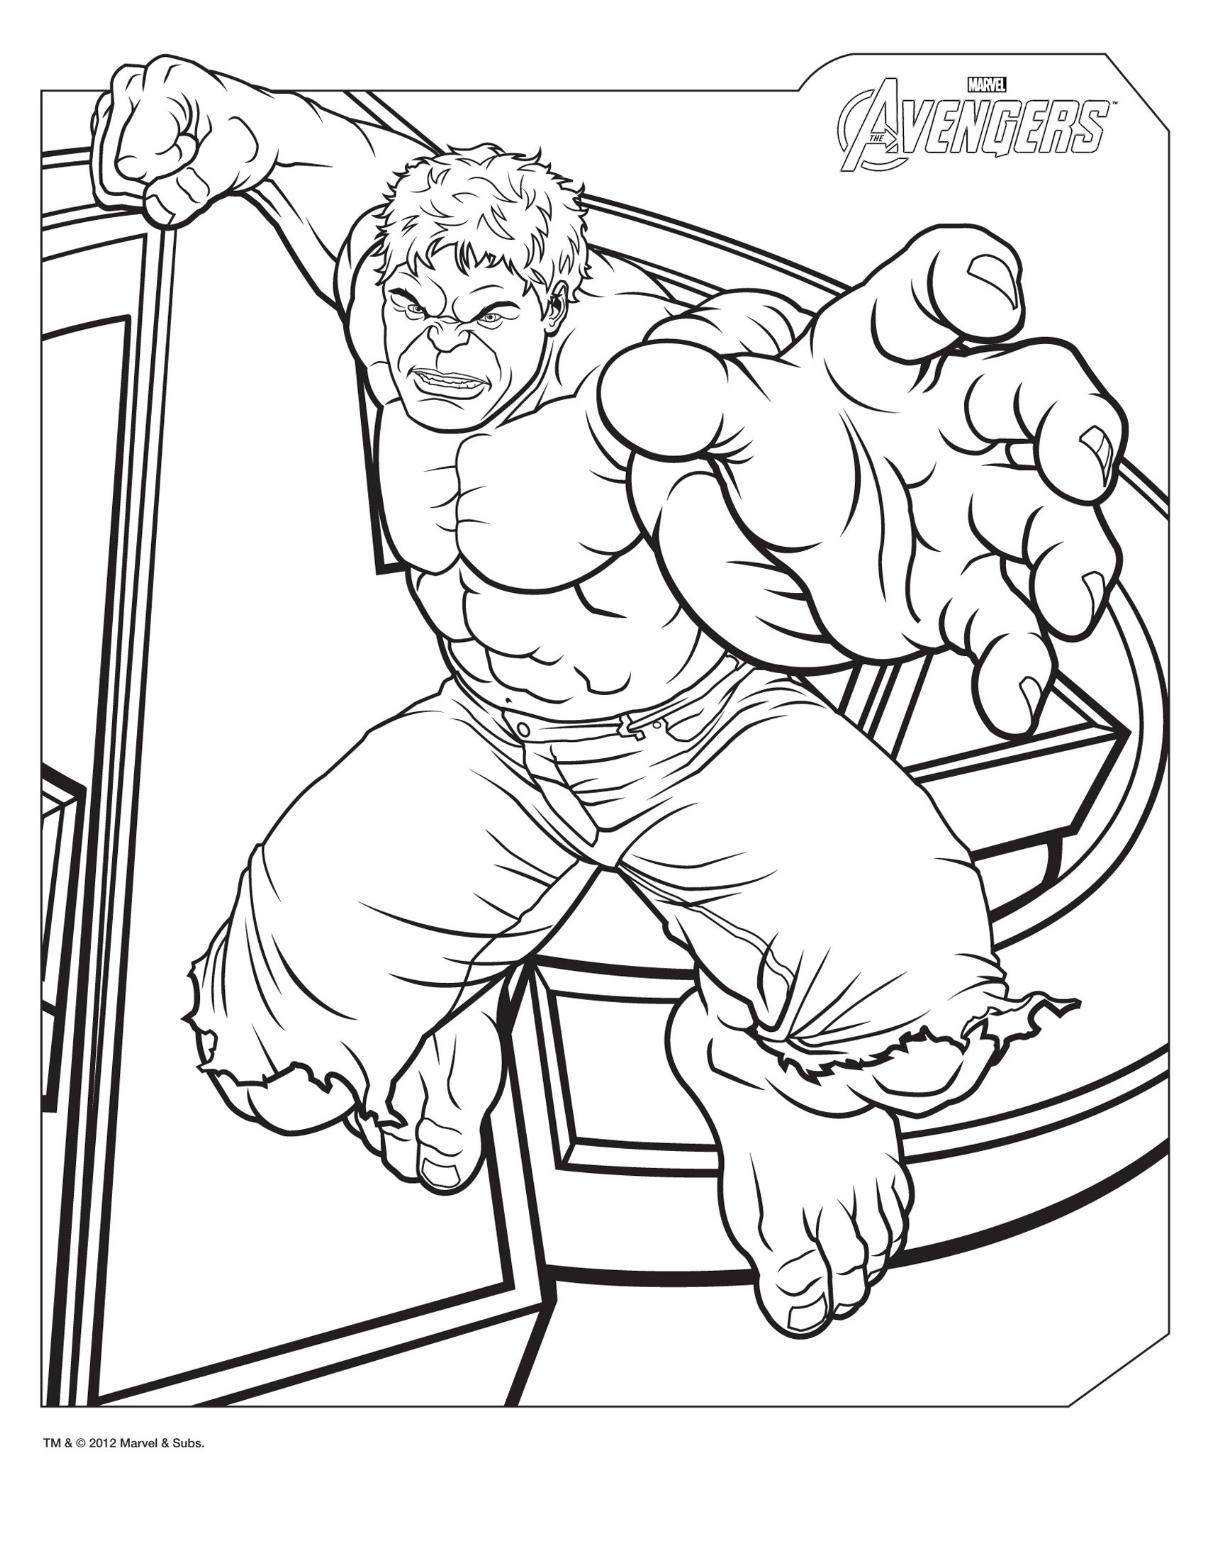 Ultimate Marvel Coloring Page for Kids - Free Hulk Printable Coloring Pages  Online for Kids - ColoringPages101.com | Coloring Pages for Kids